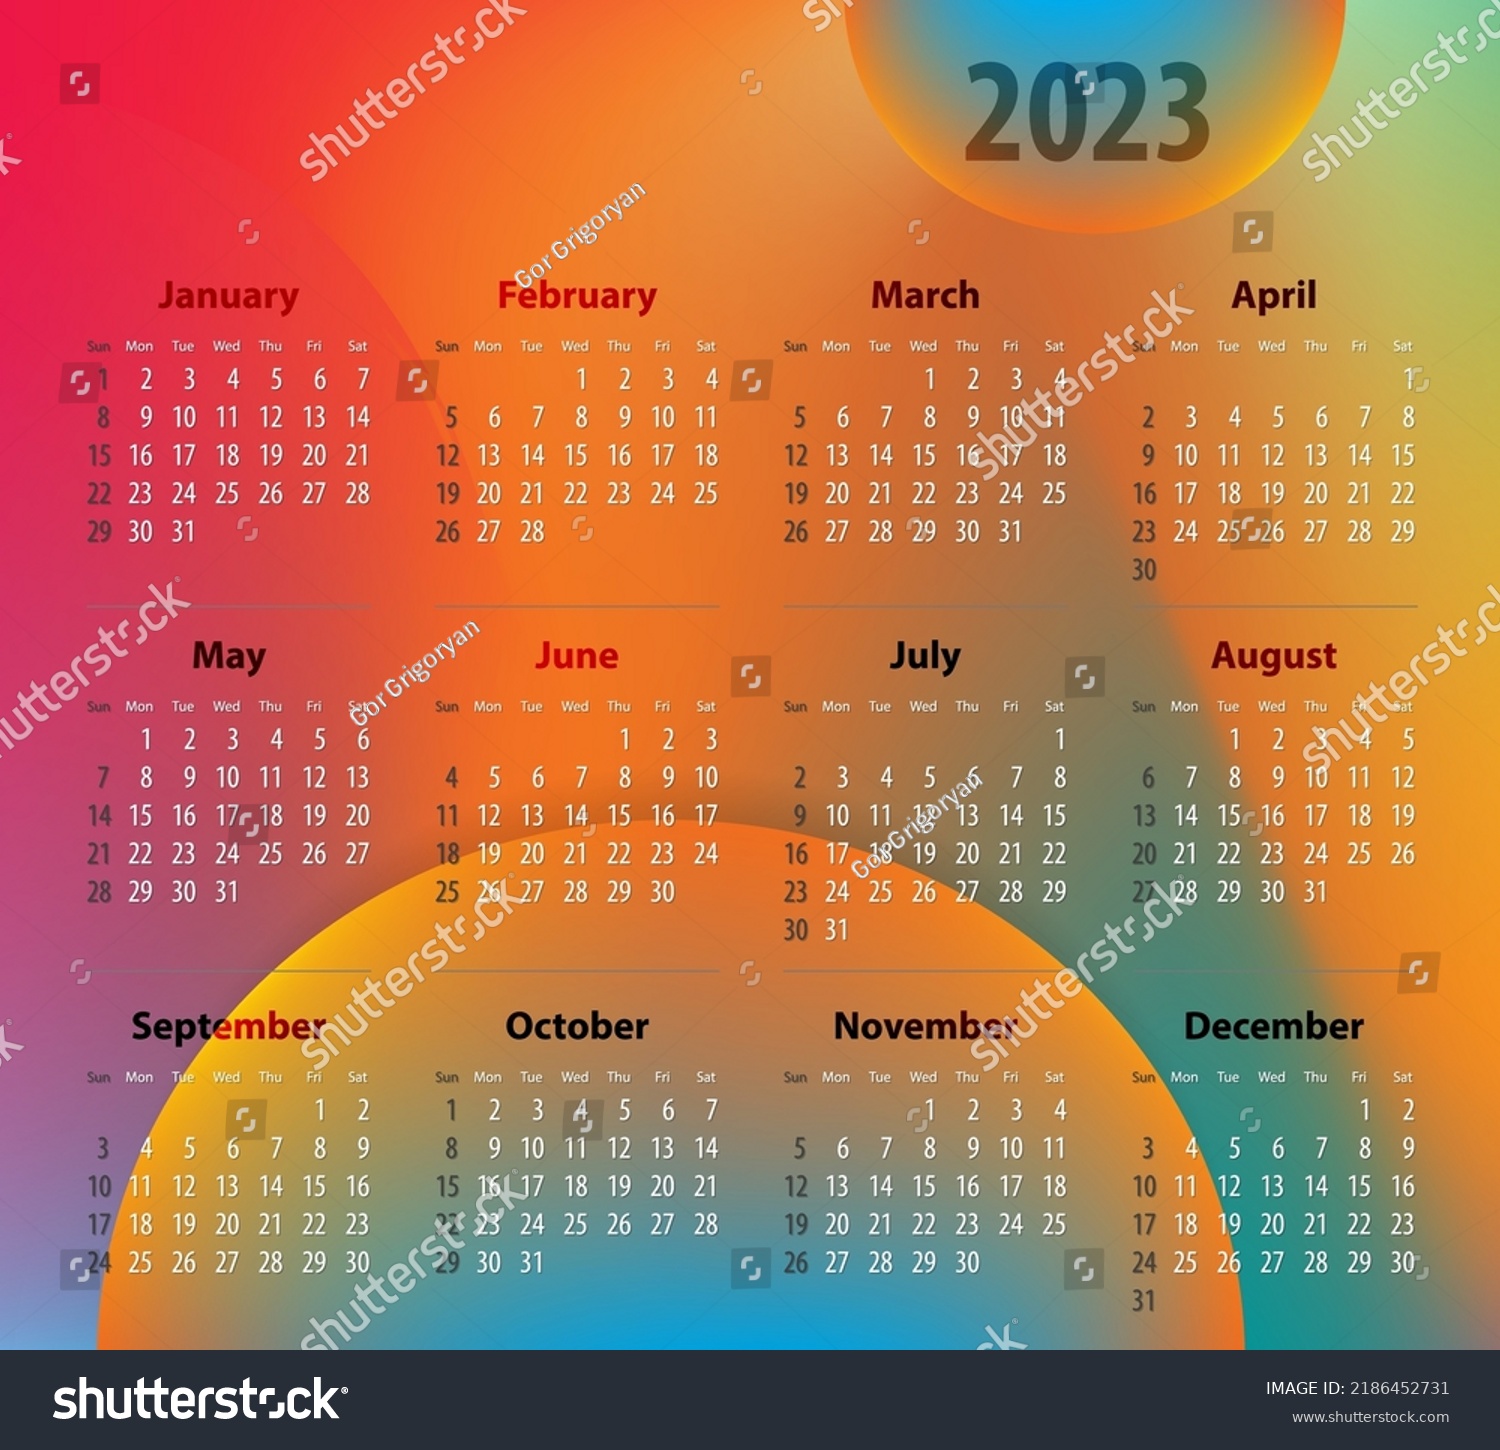 Calendar 2023 Year On Colorful Background Stock Vector Royalty Free